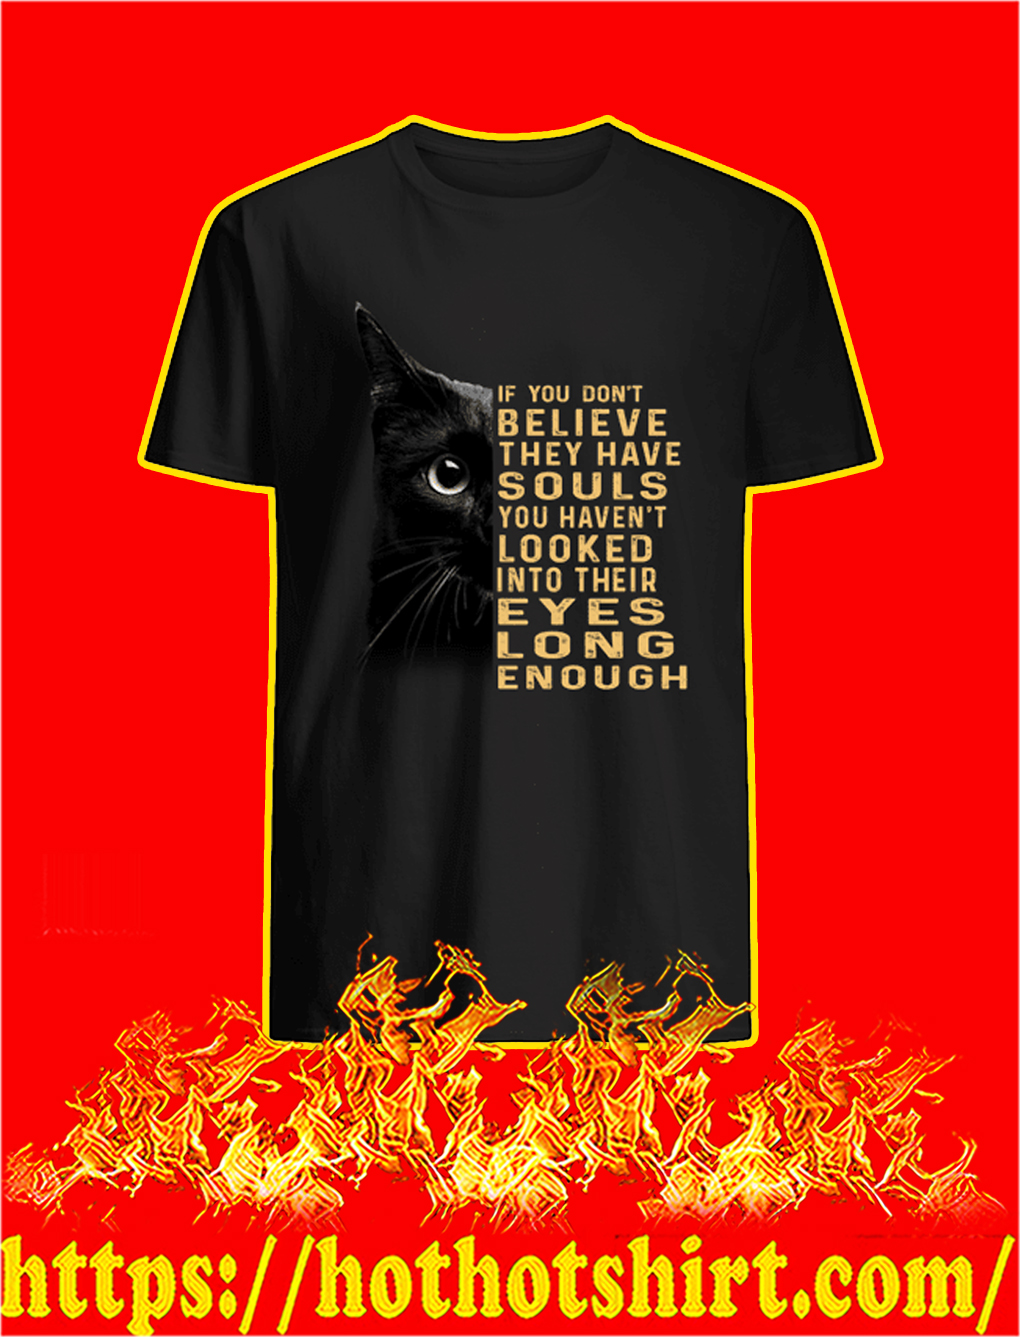 Black Cat If You Don't Believe They Have Souls shirt